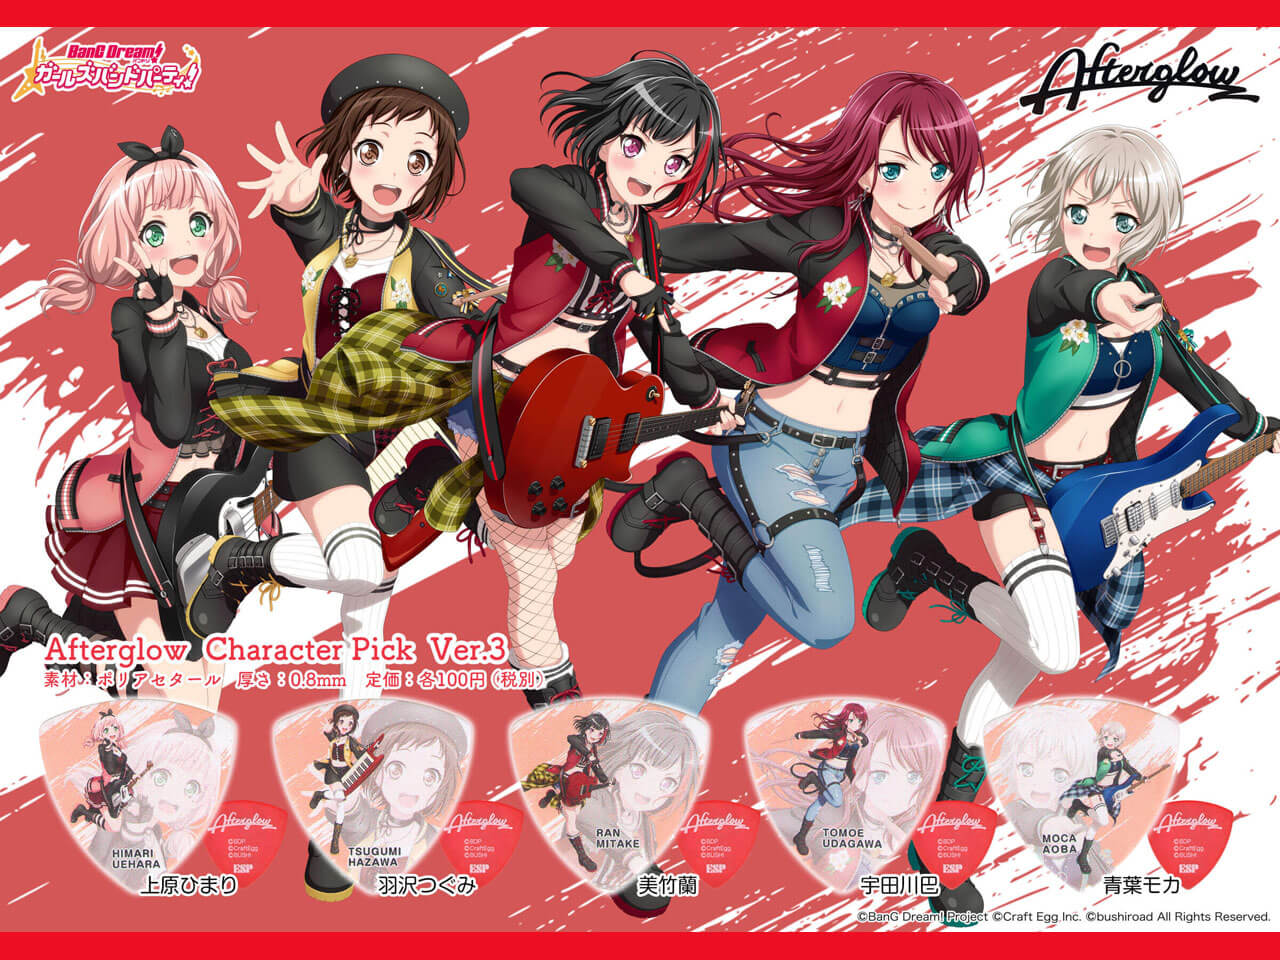 【ESP×BanG Dream!コラボピック】Afterglow Character Pick Ver.3 "青葉モカ"（GBP MOCA AFTERGLOW 3）＆”ハメパチ” セット